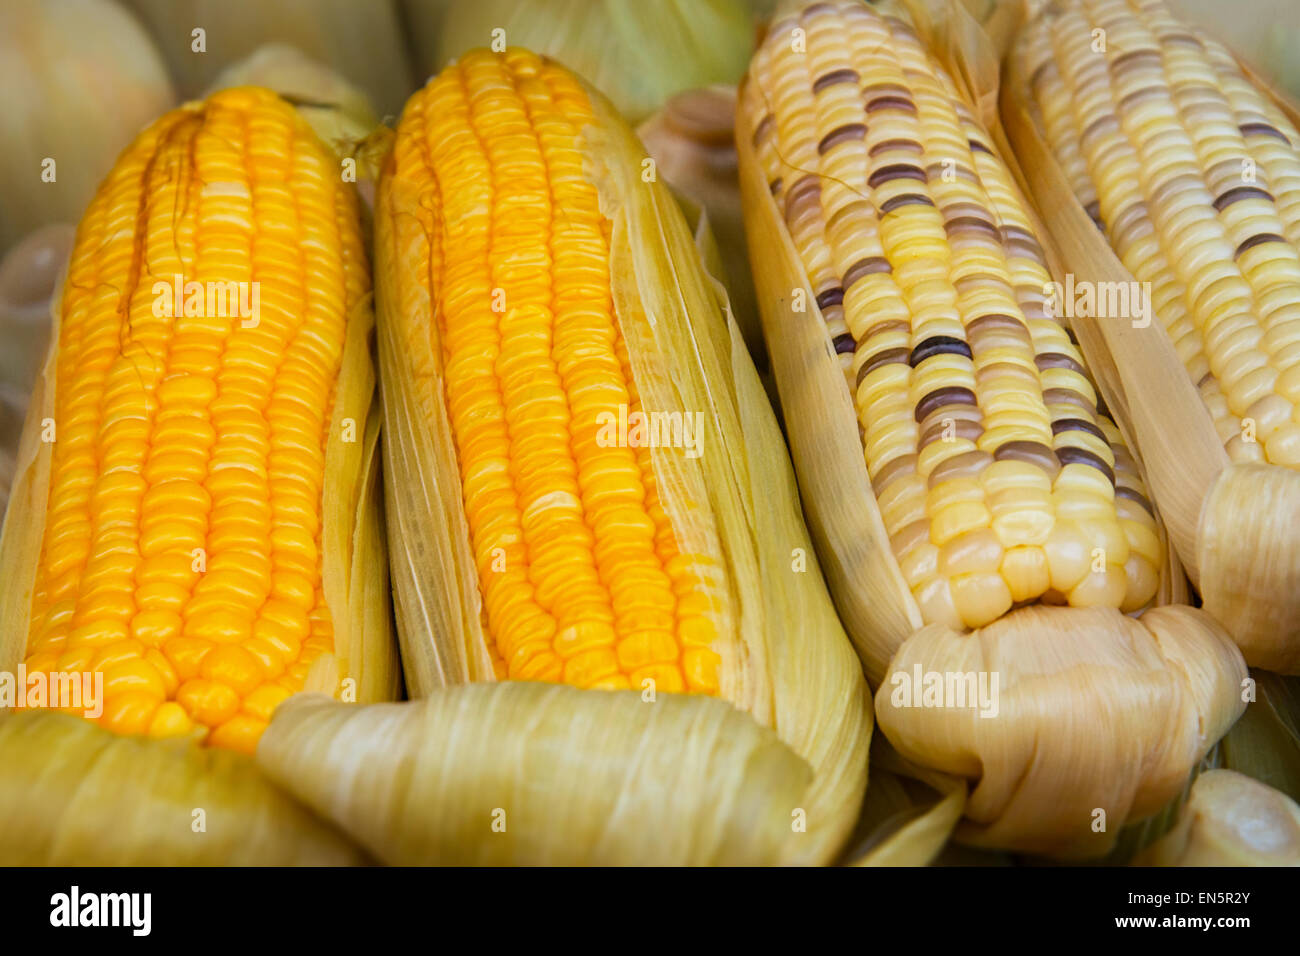 Two varieties of corn on the cob, partially shucked for display, are arranged at a street vendor's stand in Southeast Asia. Stock Photo